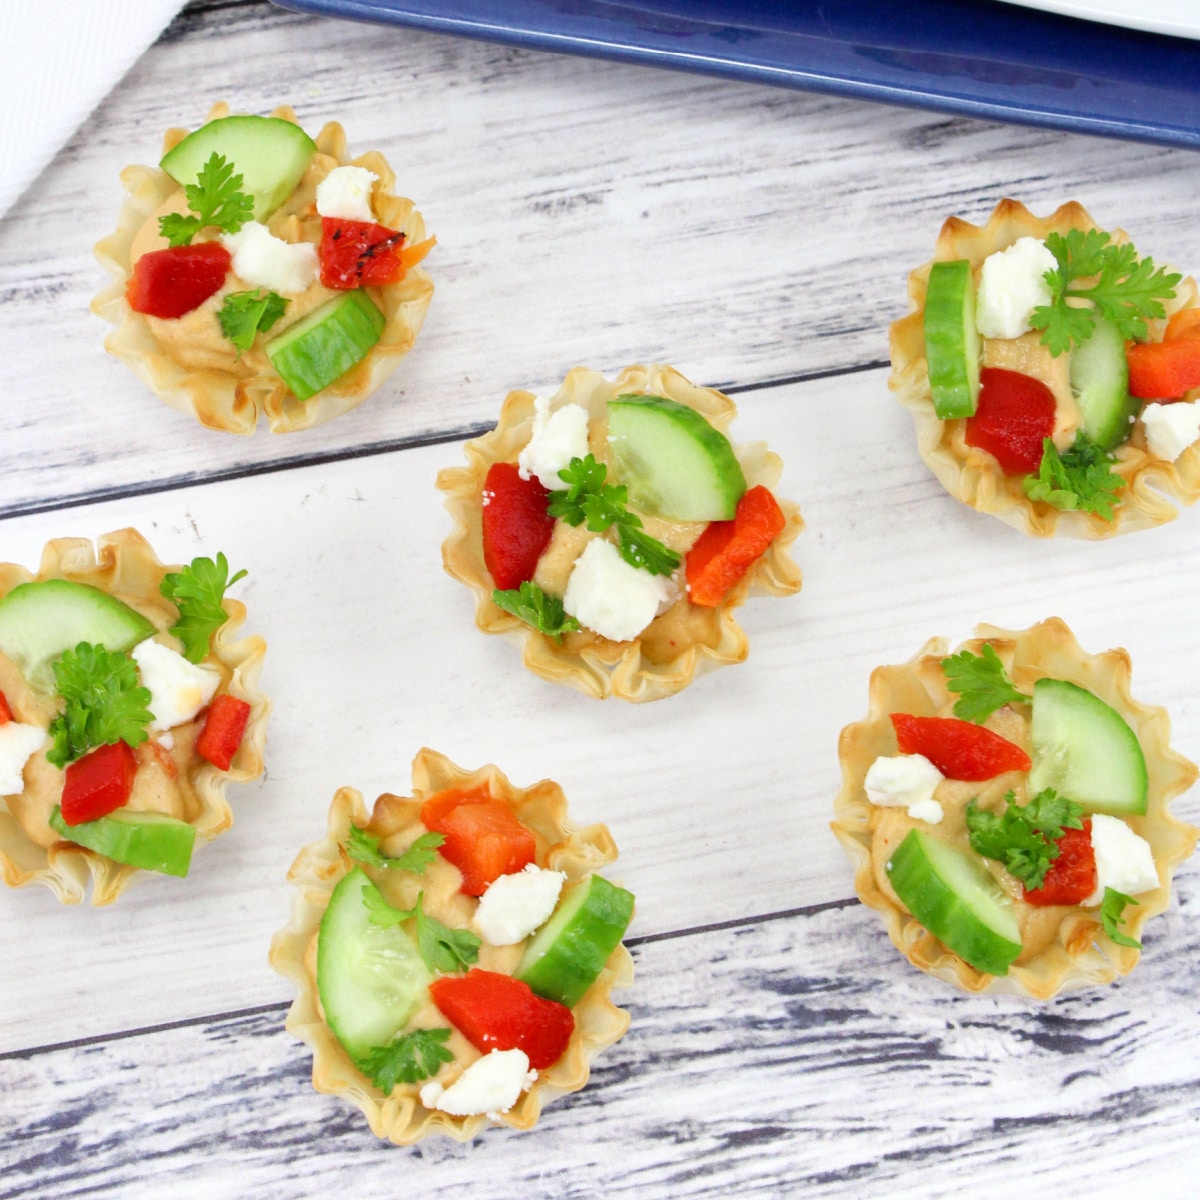 Over 100 Tasty Easy Appetizers & Finger Foods for a Party - Wondermom ...